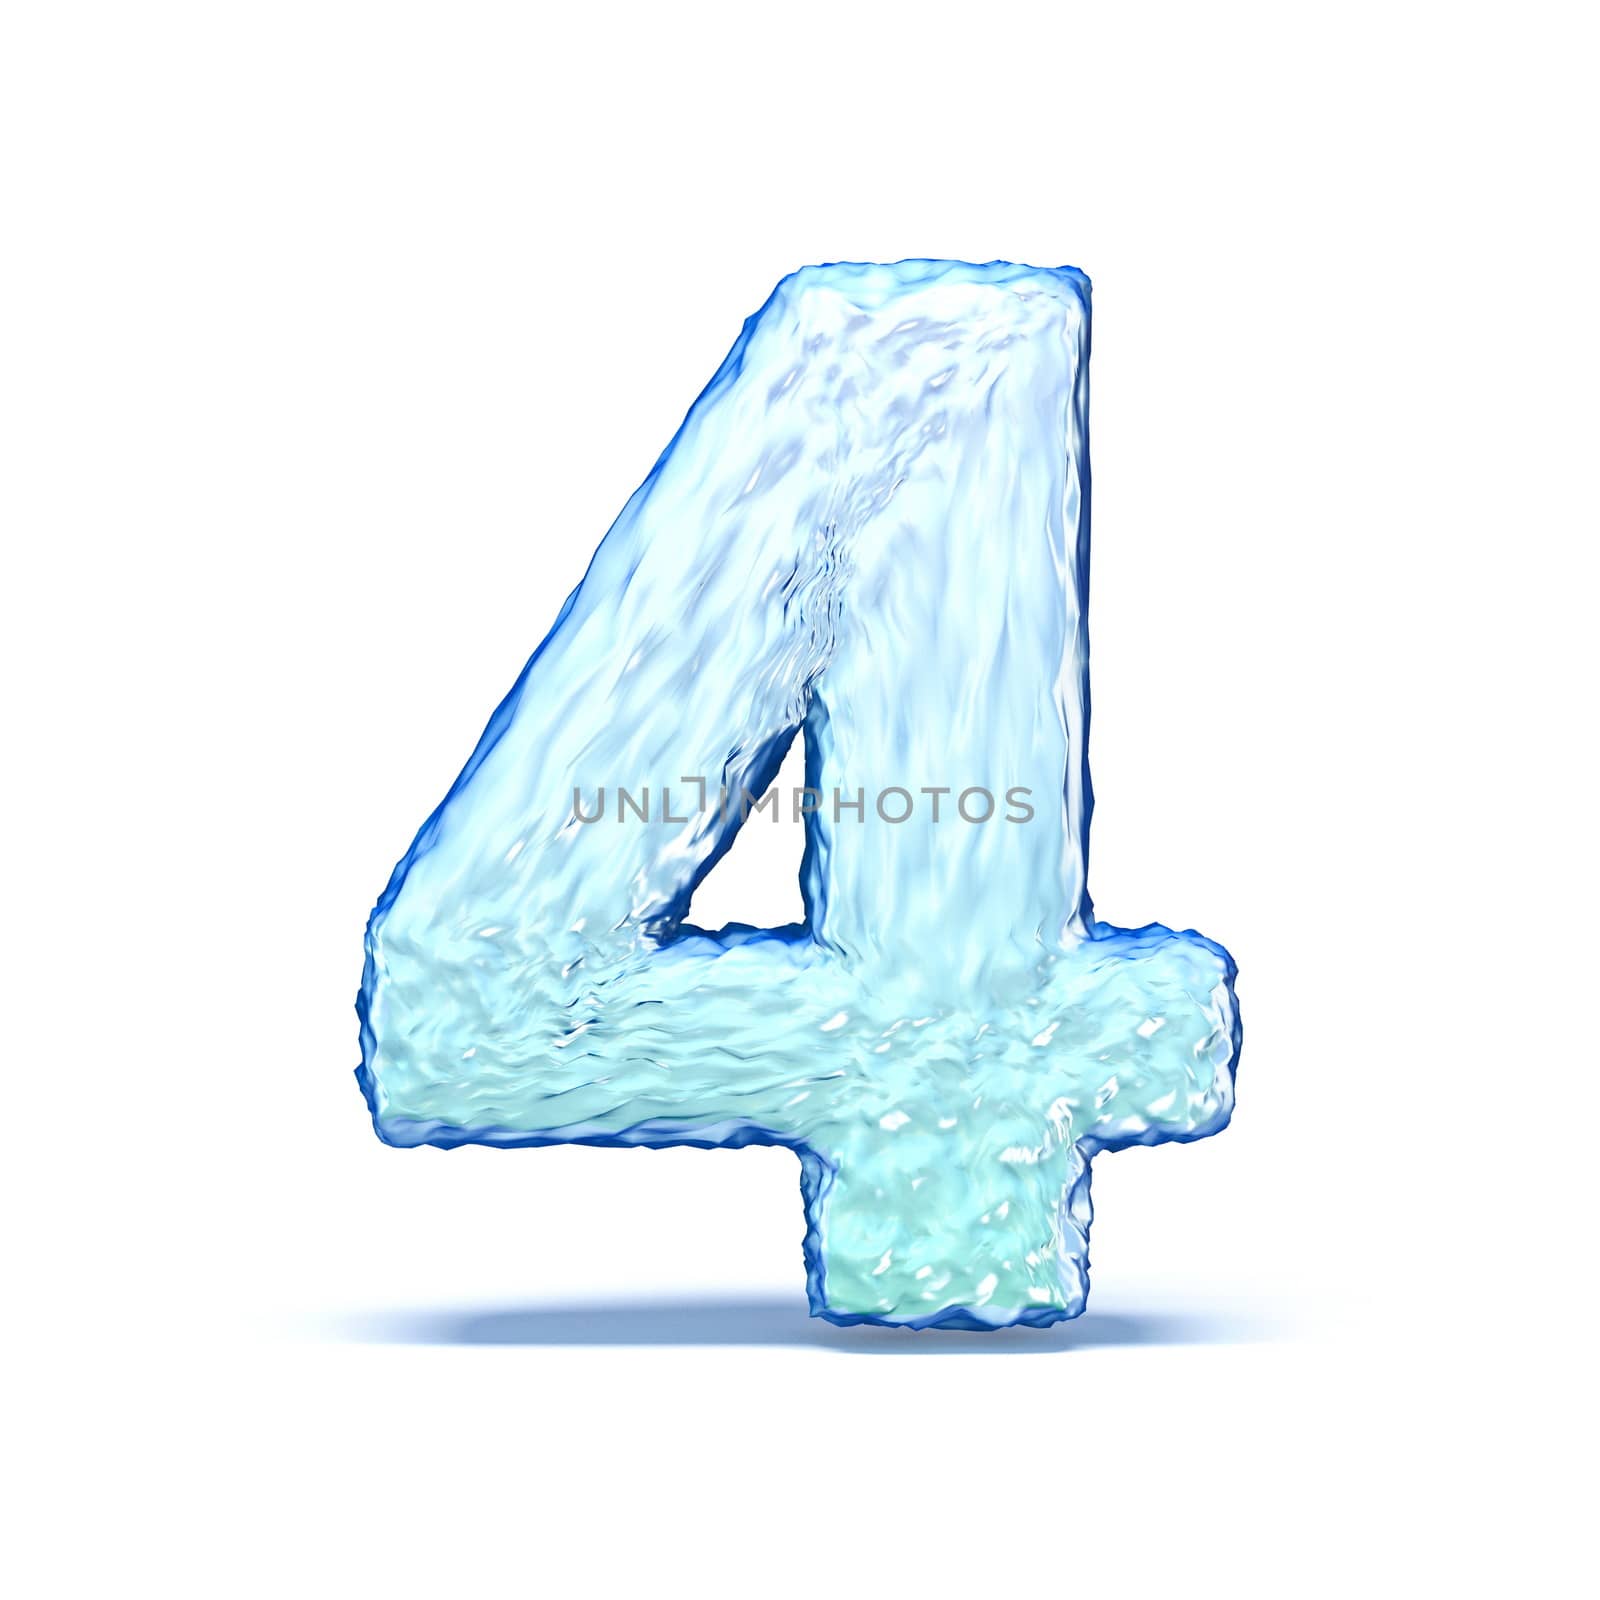 Ice crystal font Number 4 FOUR 3D render illustration isolated on white background